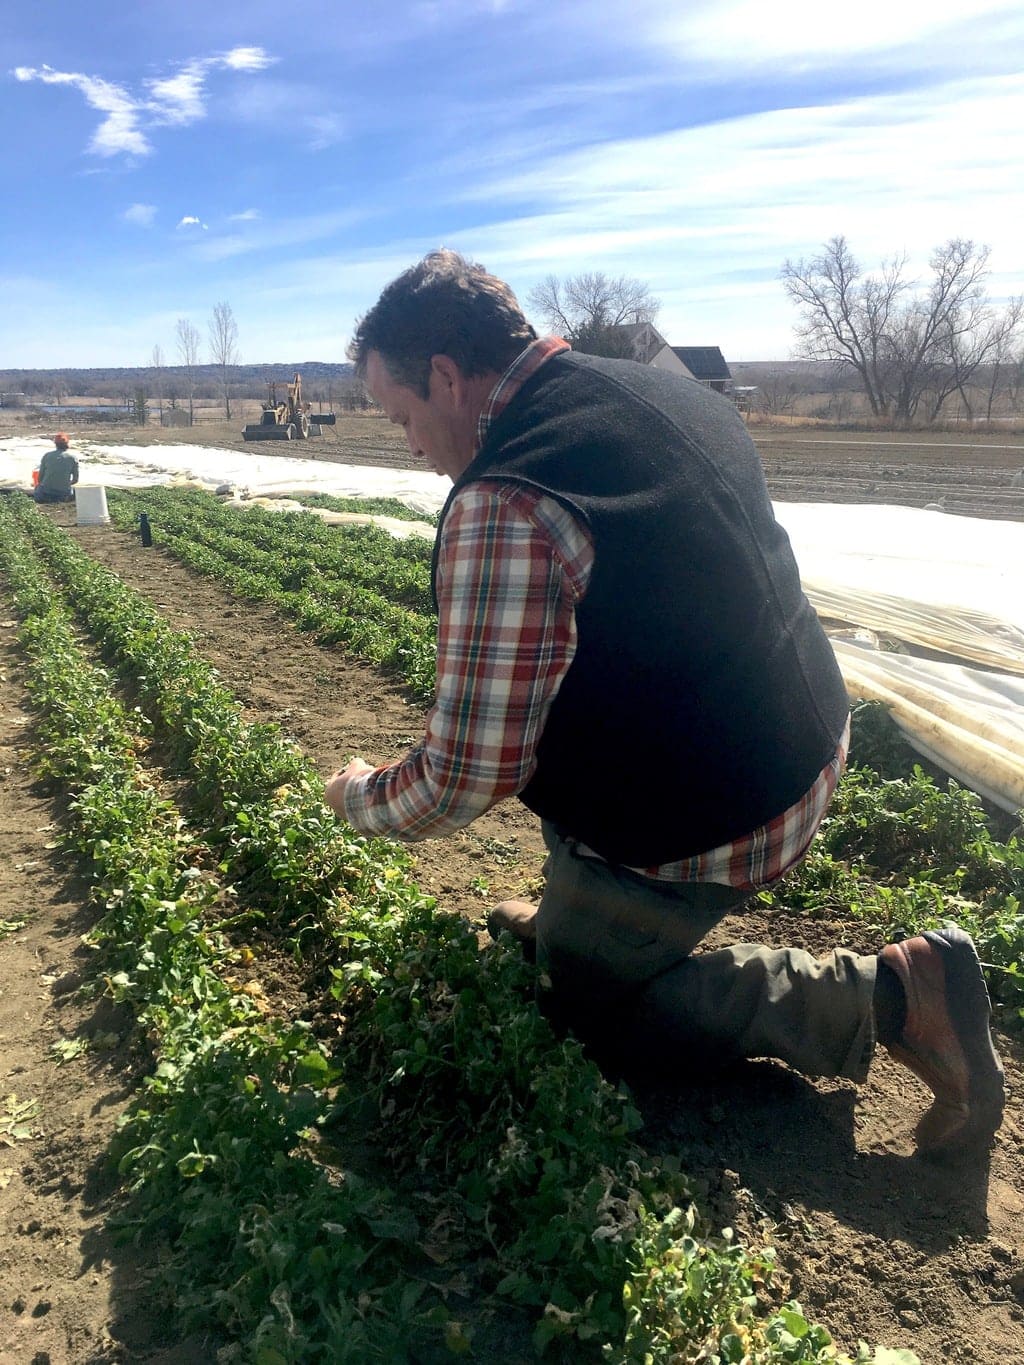 Chef Eric Skokan inspecting the biodynamic and organic certified arugula on Black Cat Farm, which supplies most of the produce and meat for Black Cat Bistro and Bramble & Hare restaurant in Boulder, Colorado.